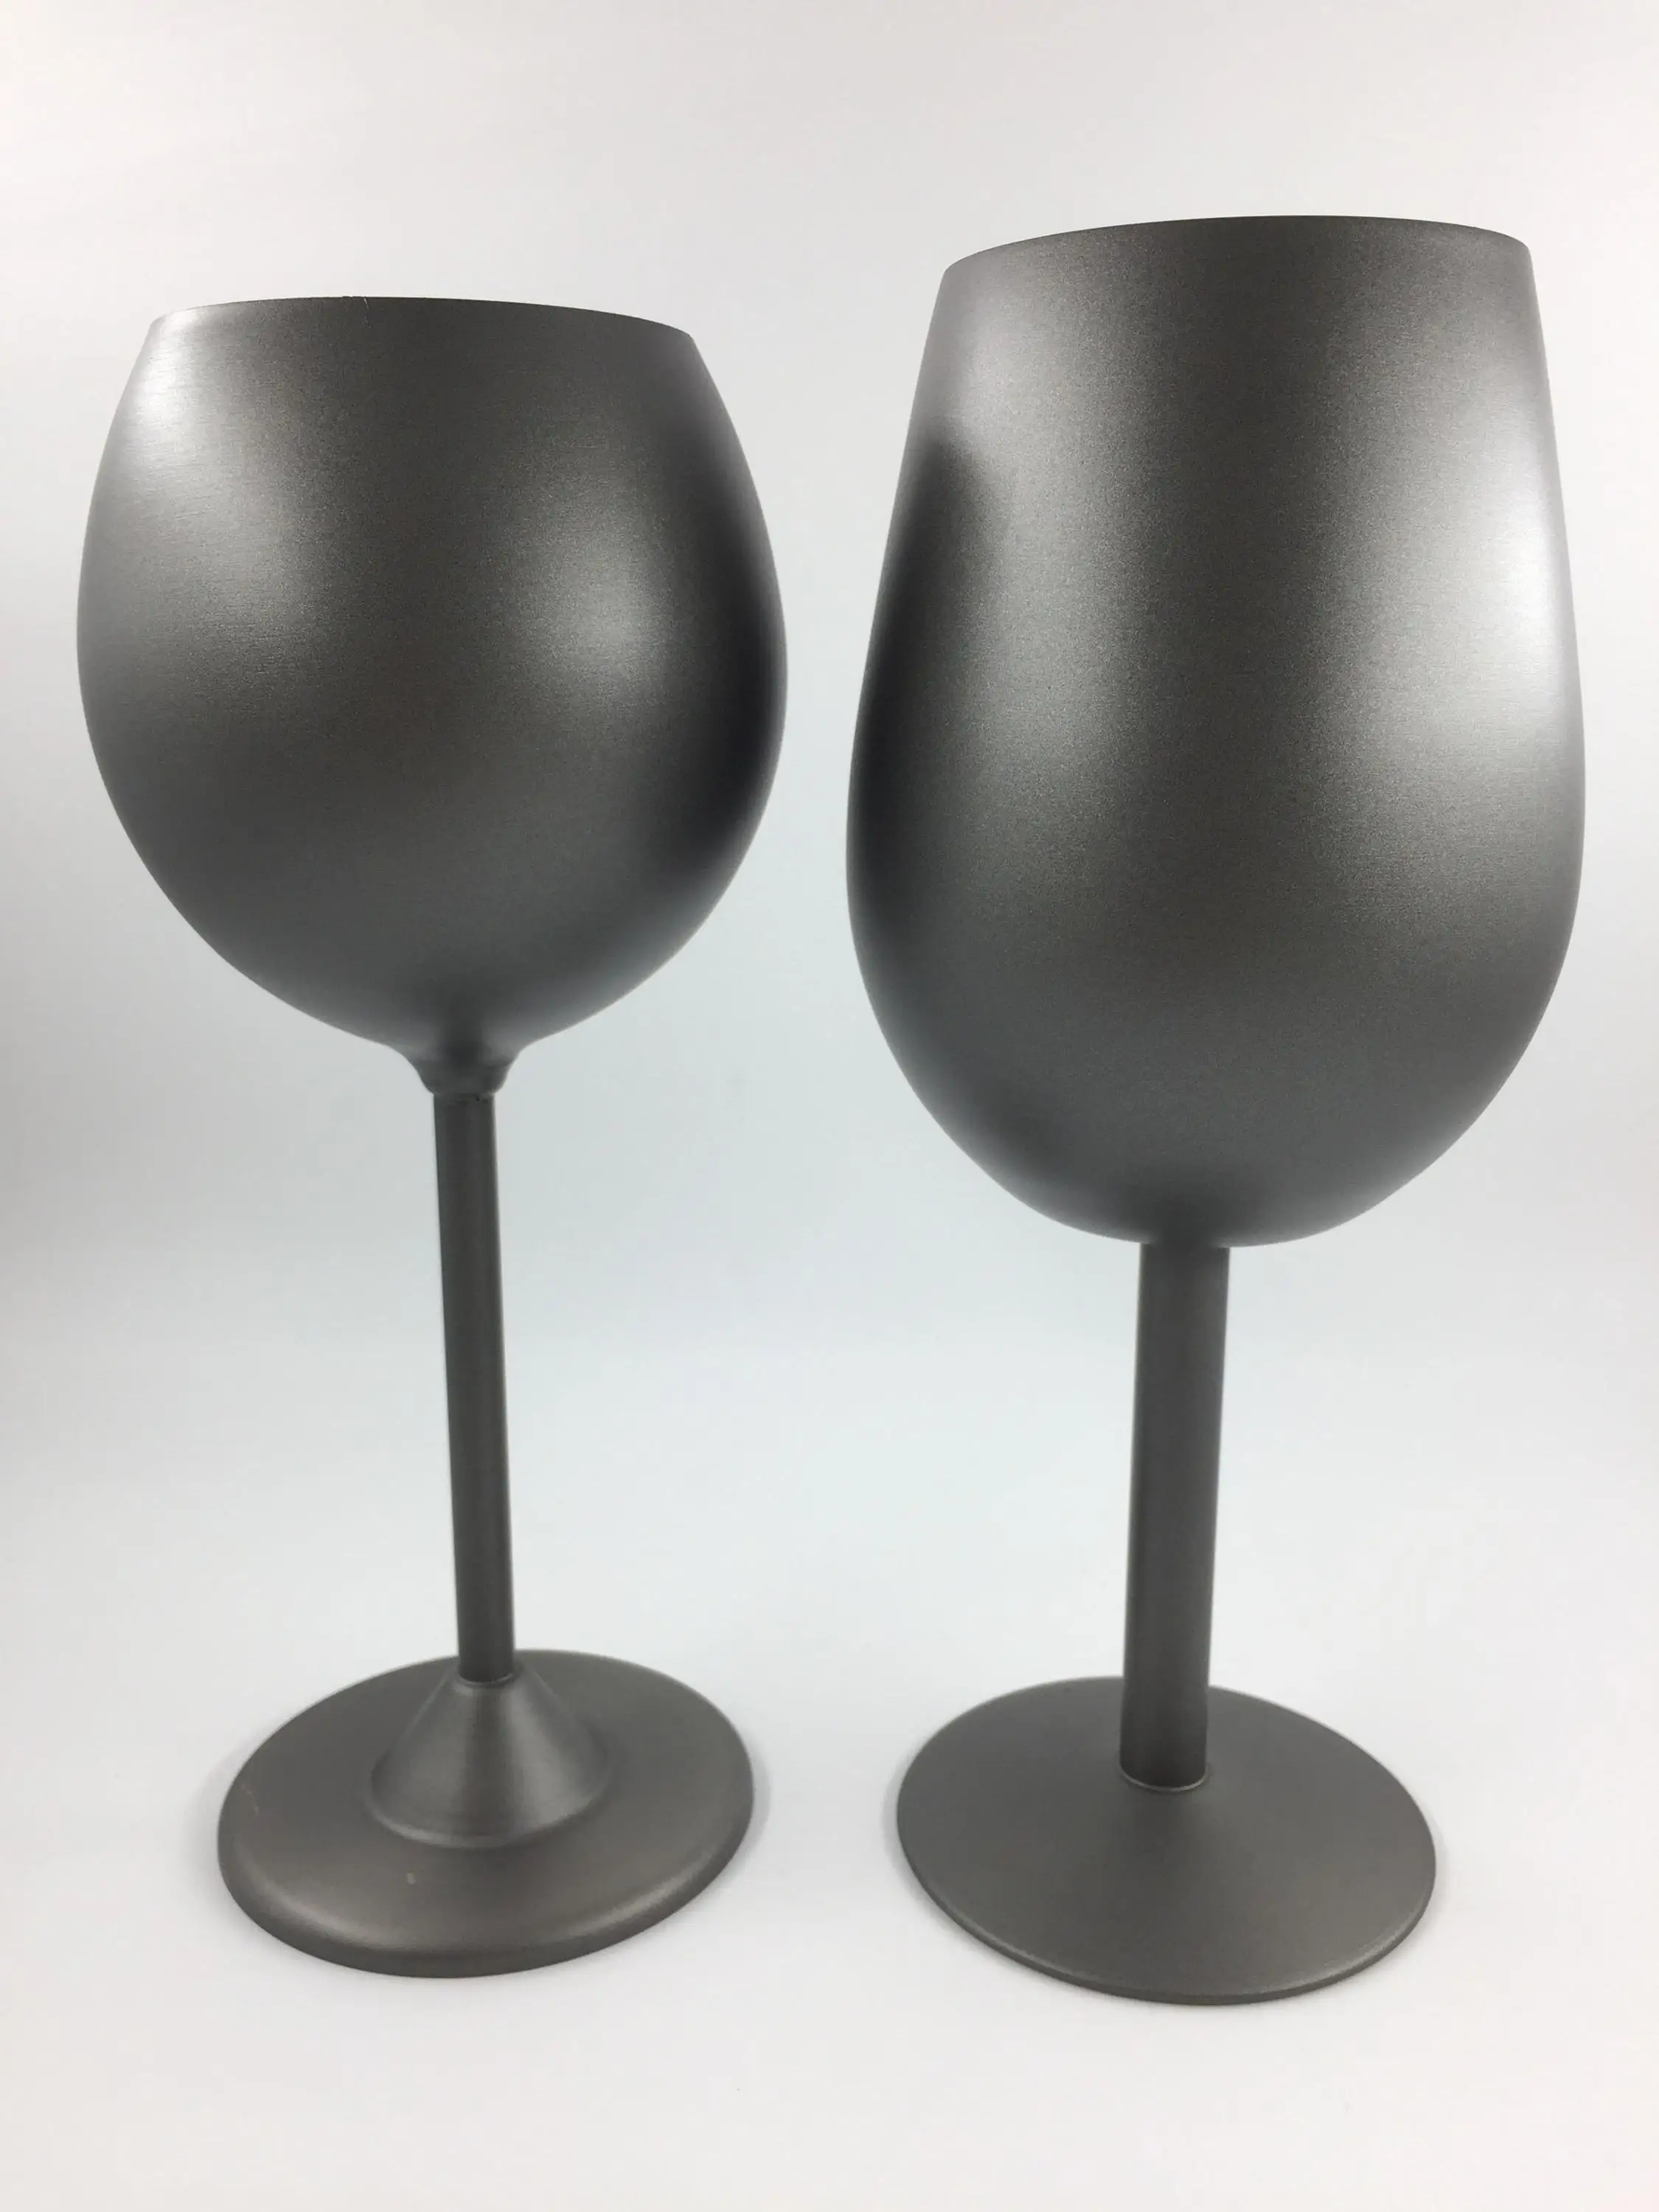 Bpa Free Stainless Steel Wine Glass With Long Stem,Set Of 2,Unbreakable Stainless Steel Wine Glass With Stem